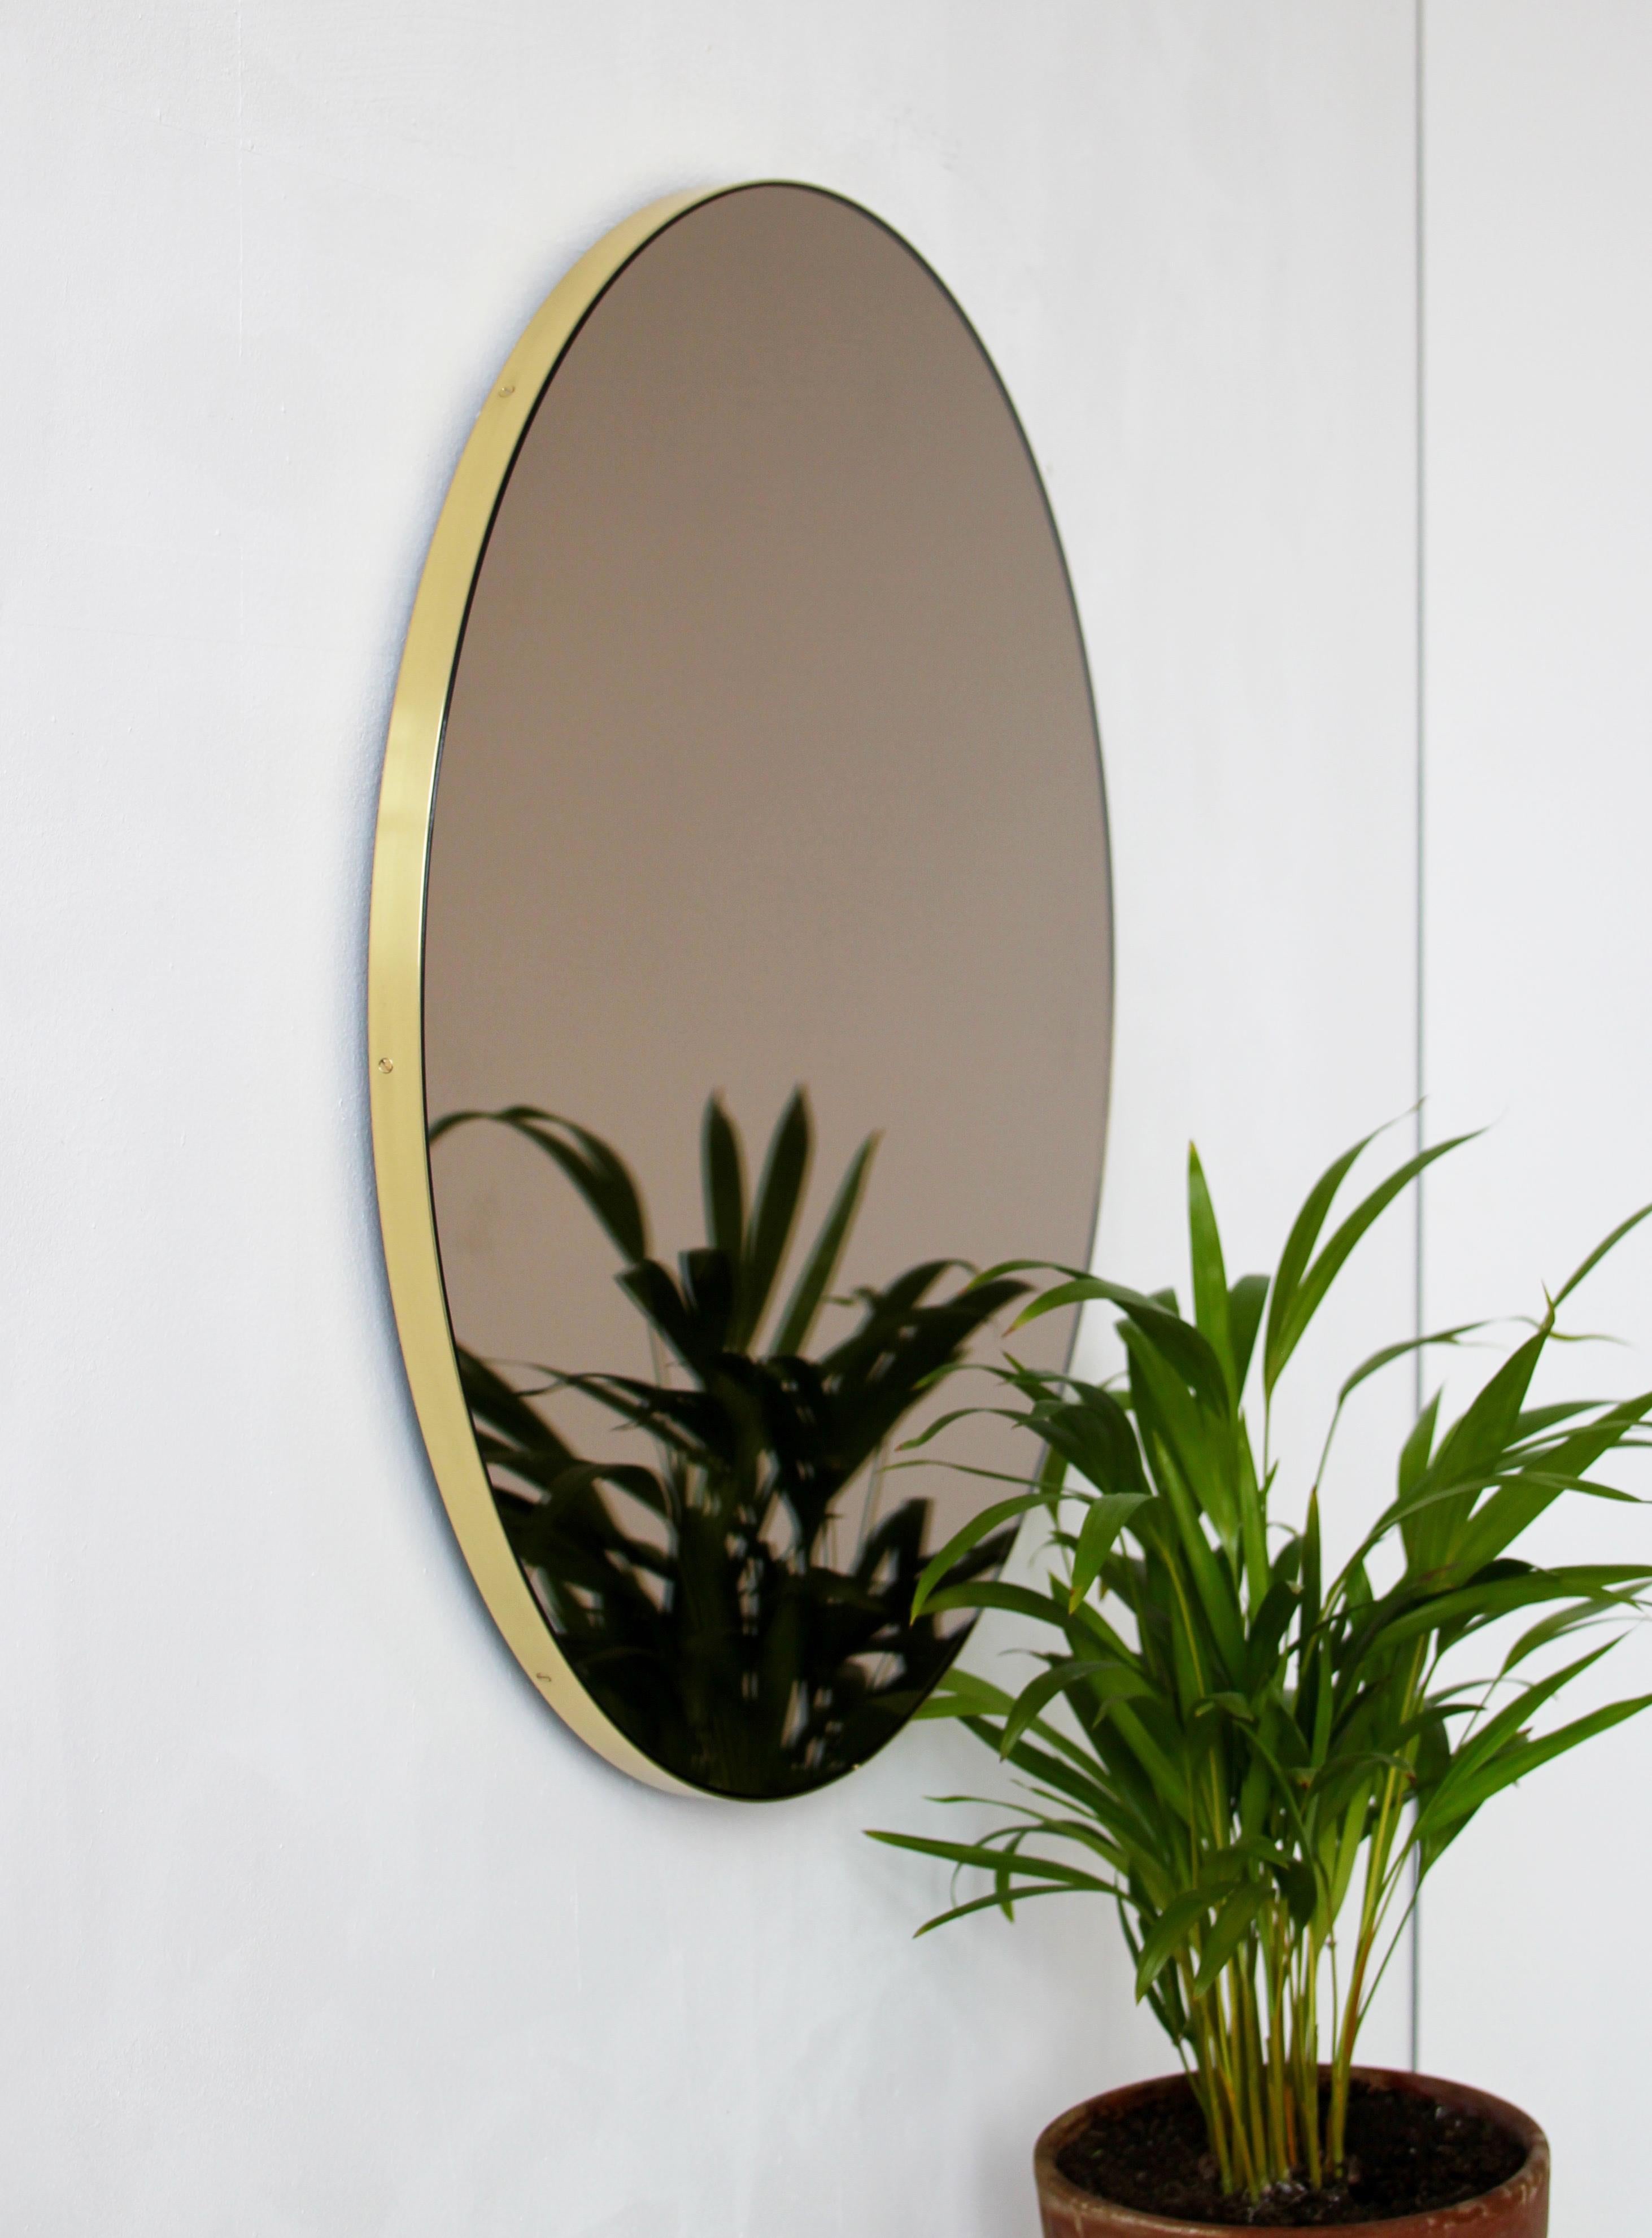 Minimalist Orbis™ bronze tinted round mirror with an elegant brushed brass frame. The detailing and finish, including visible brass screws, emphasize the crafty and quality feel of the mirror, a true signature of our brand. Designed and made in